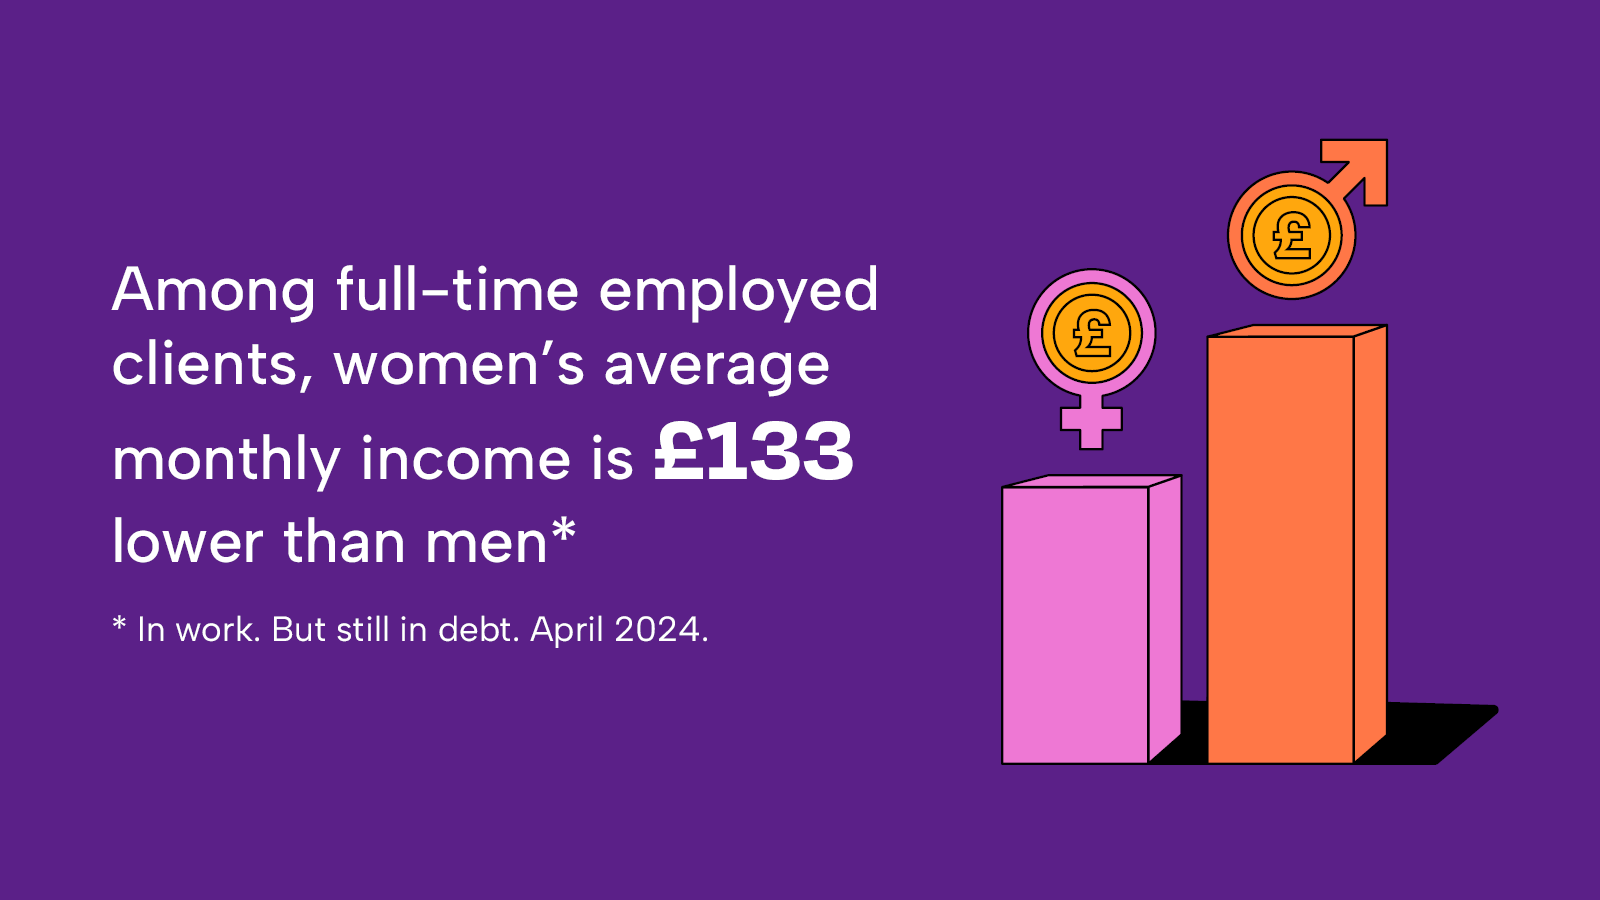 Women's average income is £133 lower than men